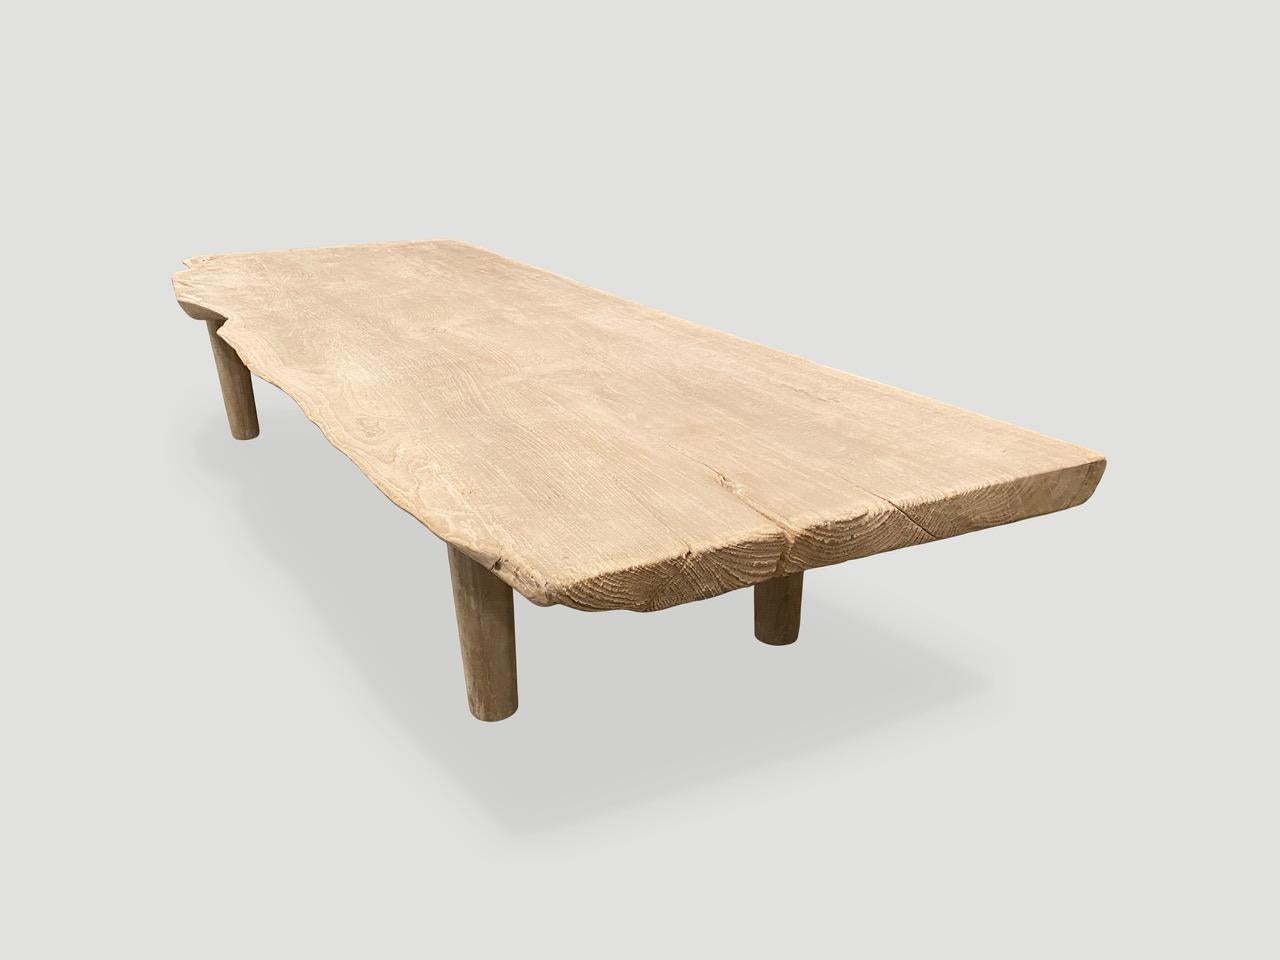 Organic Modern Andrianna Shamaris White Washed Live Edge Teak Wood Coffee Table or Bench For Sale